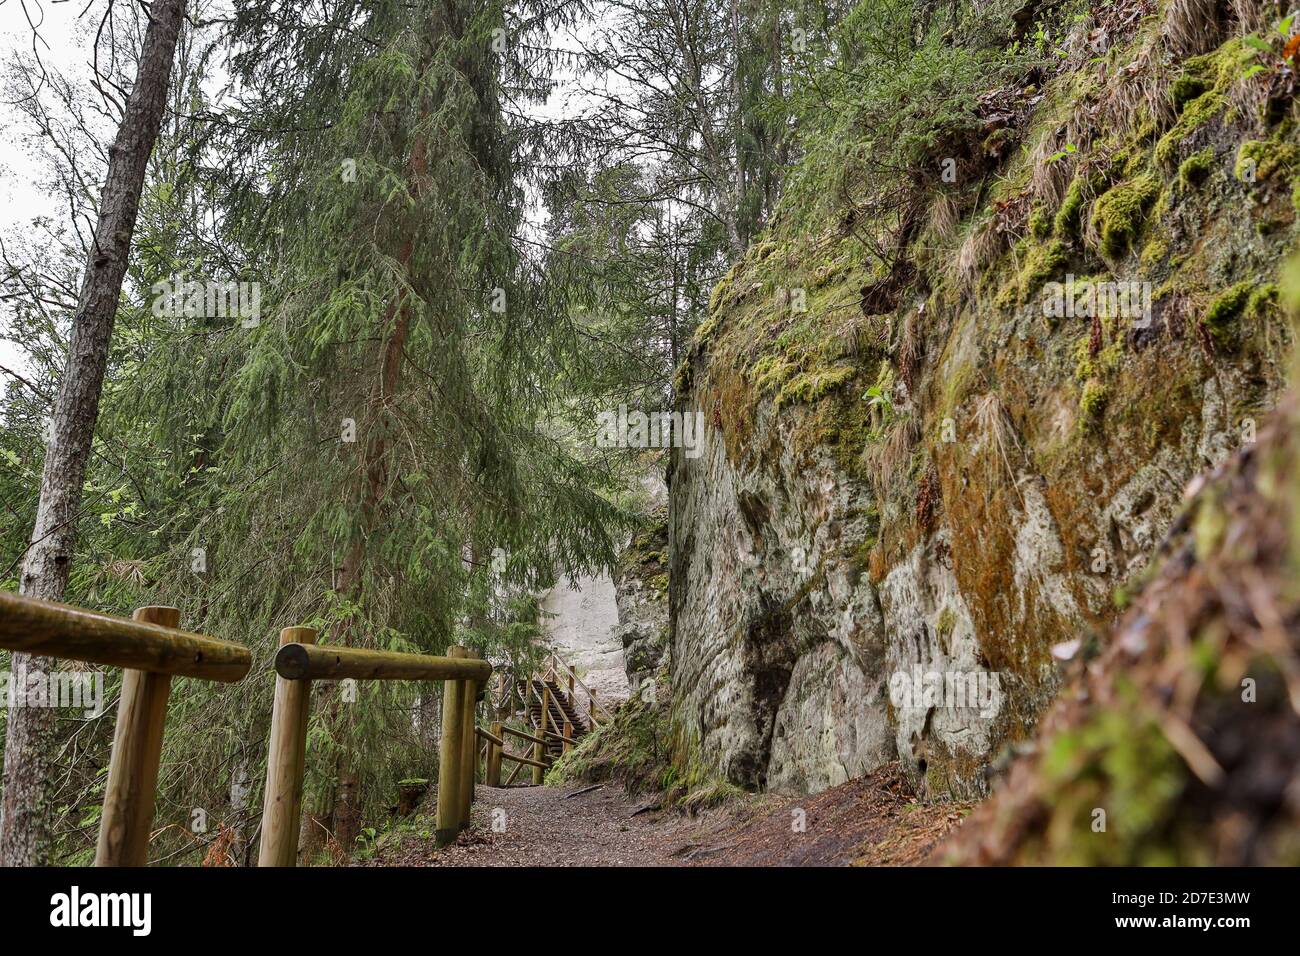 Turist track, path near large natural clifs in europe. Photo taken on a cloudy spring day. Stock Photo